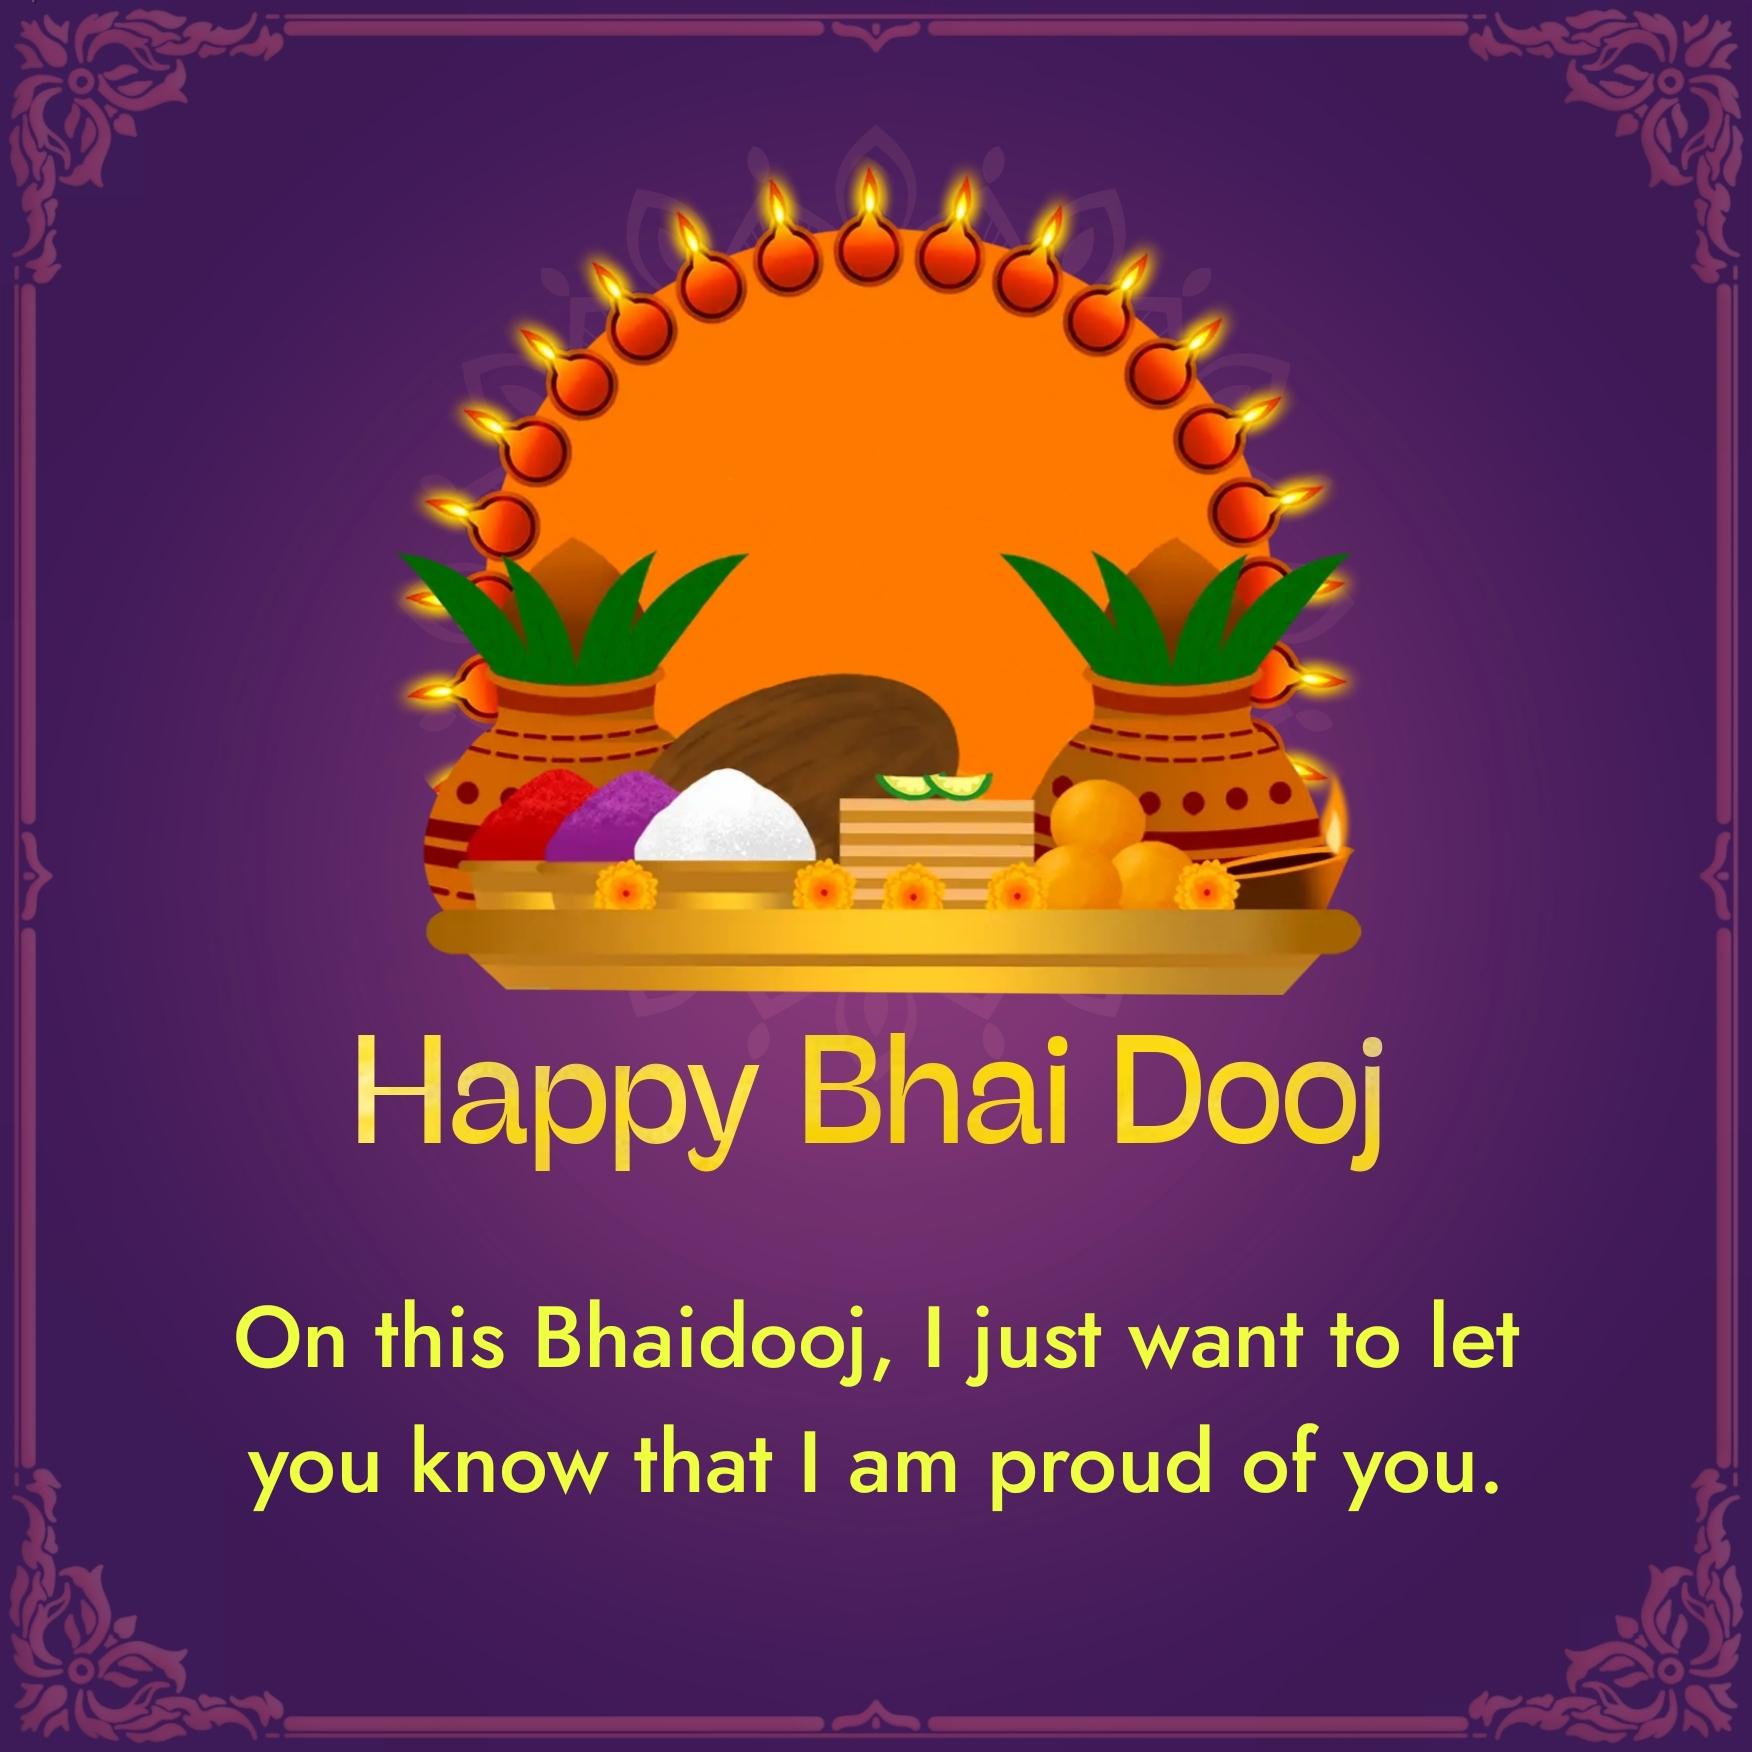 On this Bhaidooj I just want to let you know that